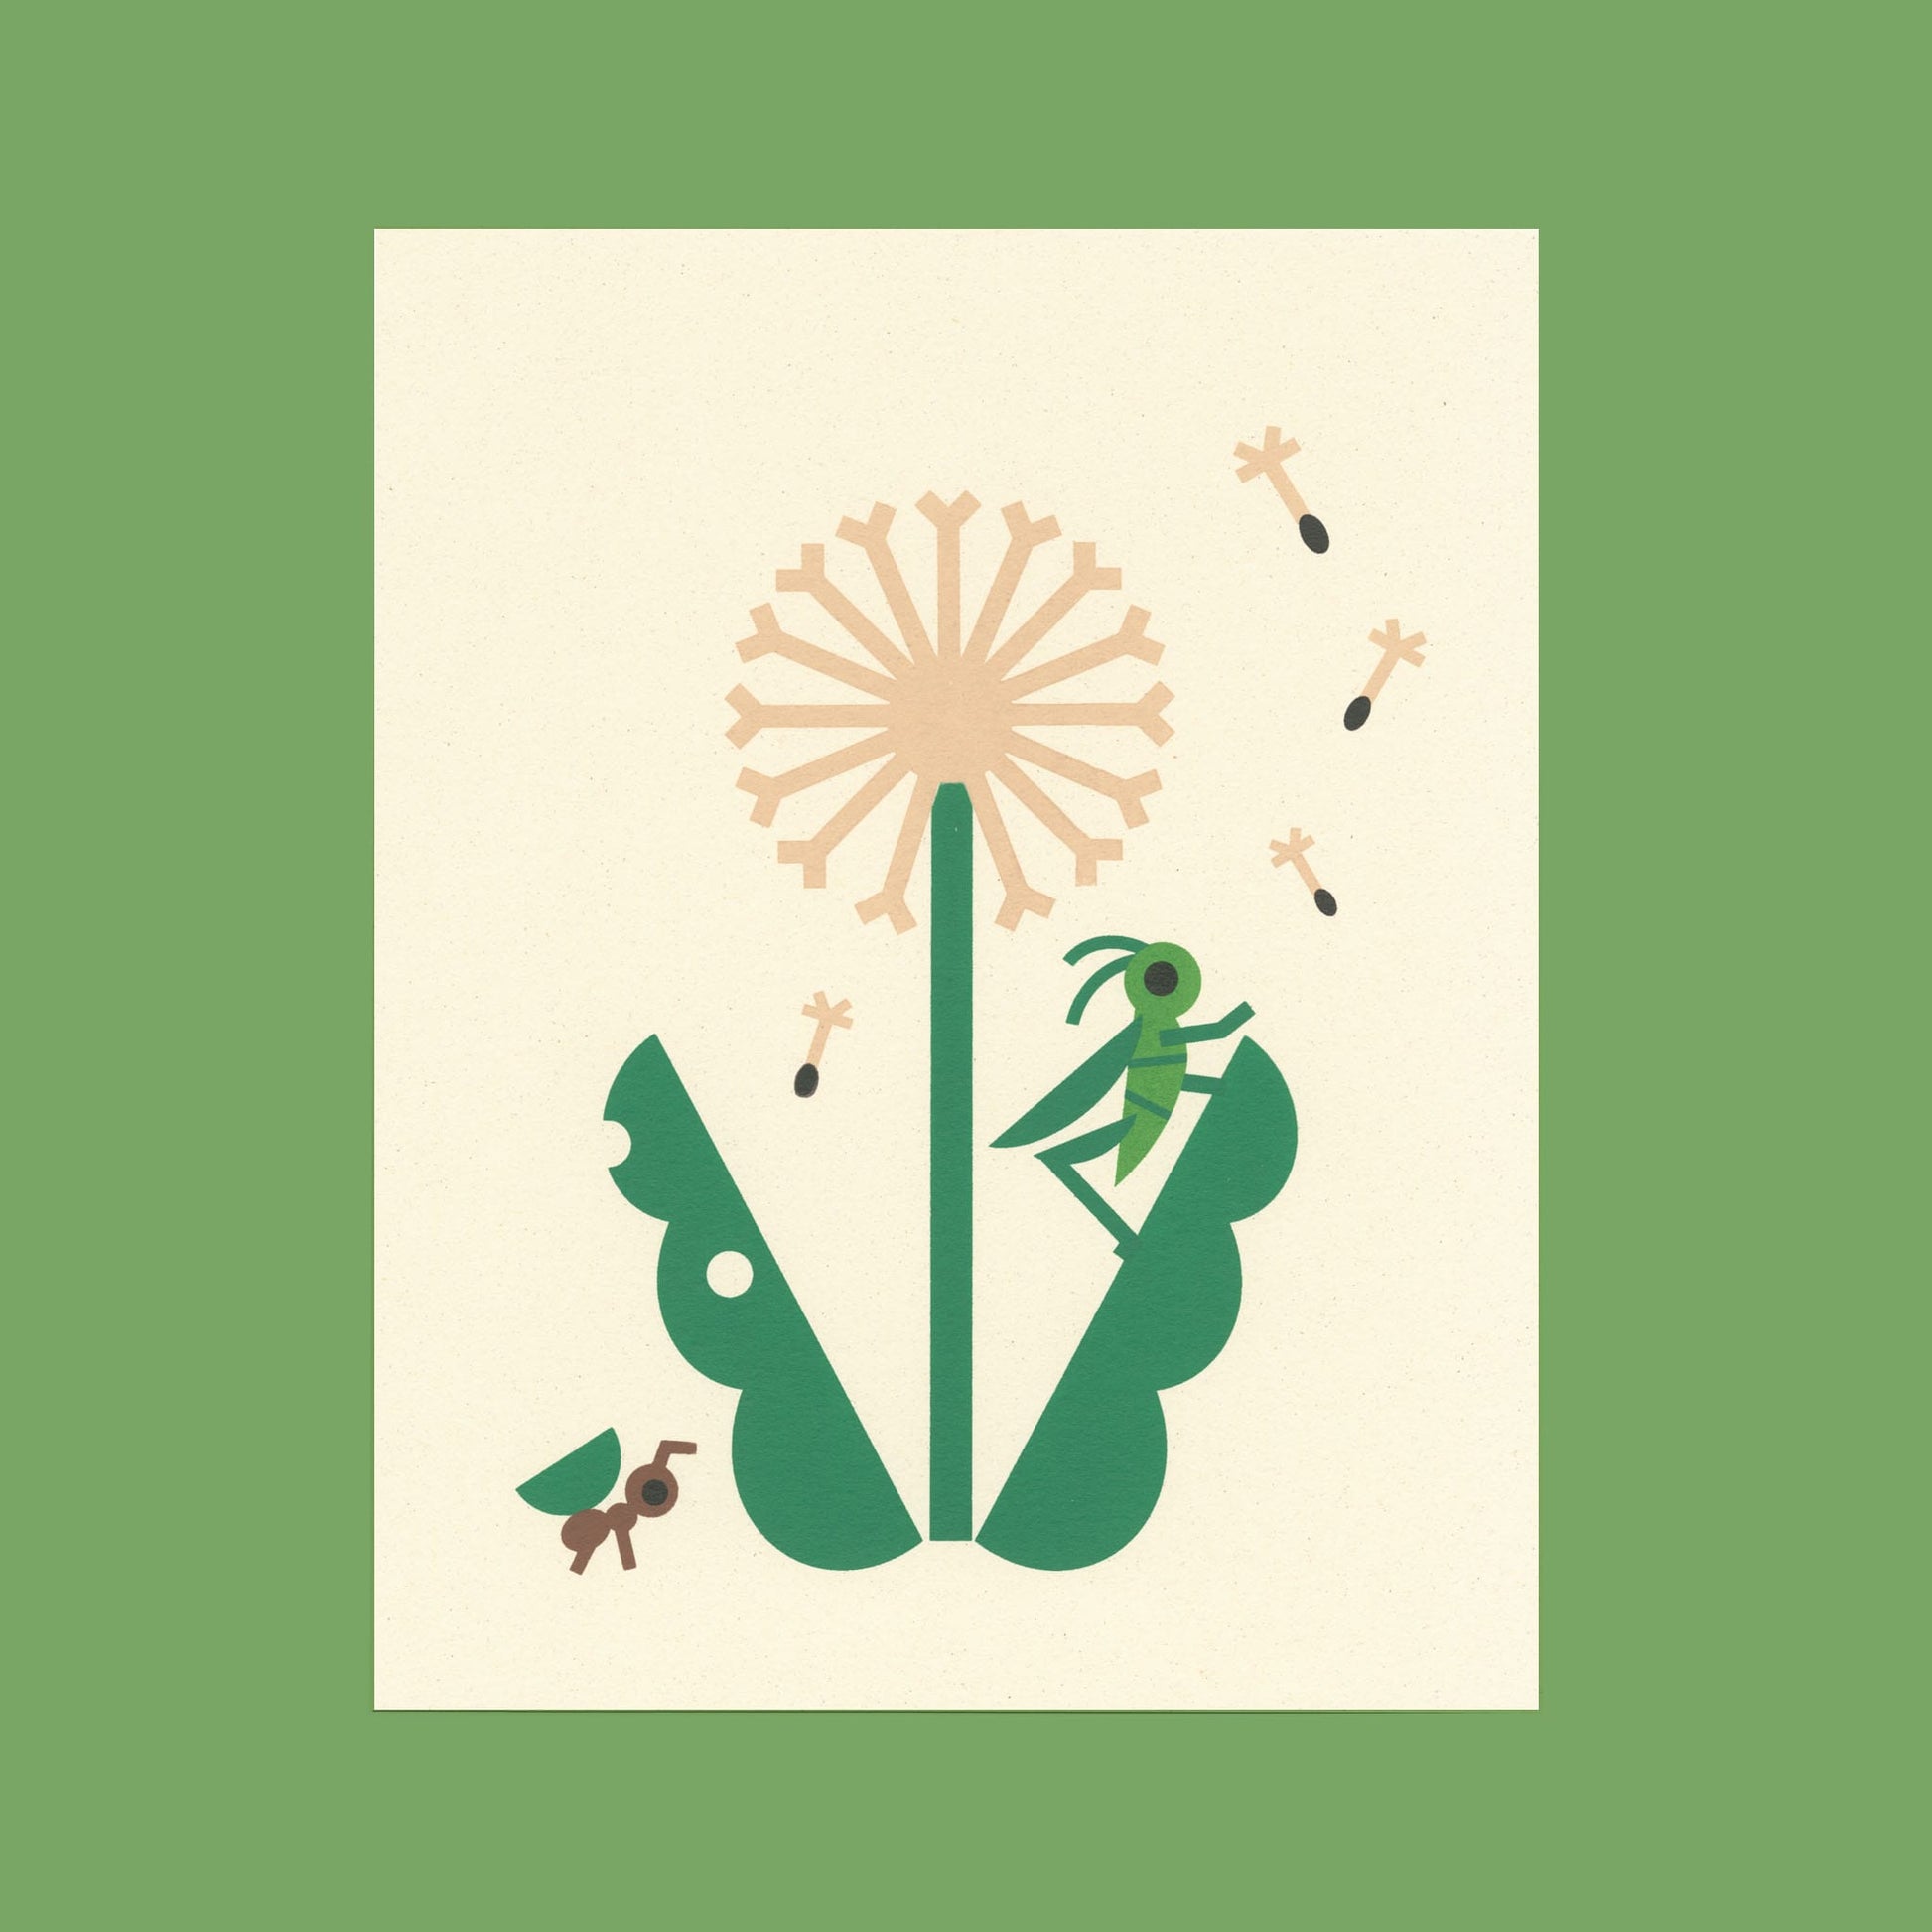 An illustration of an ant carrying a leaf and a cricket rests on a dandelion on an art print on off-white paper.  The print is displayed on a green background.